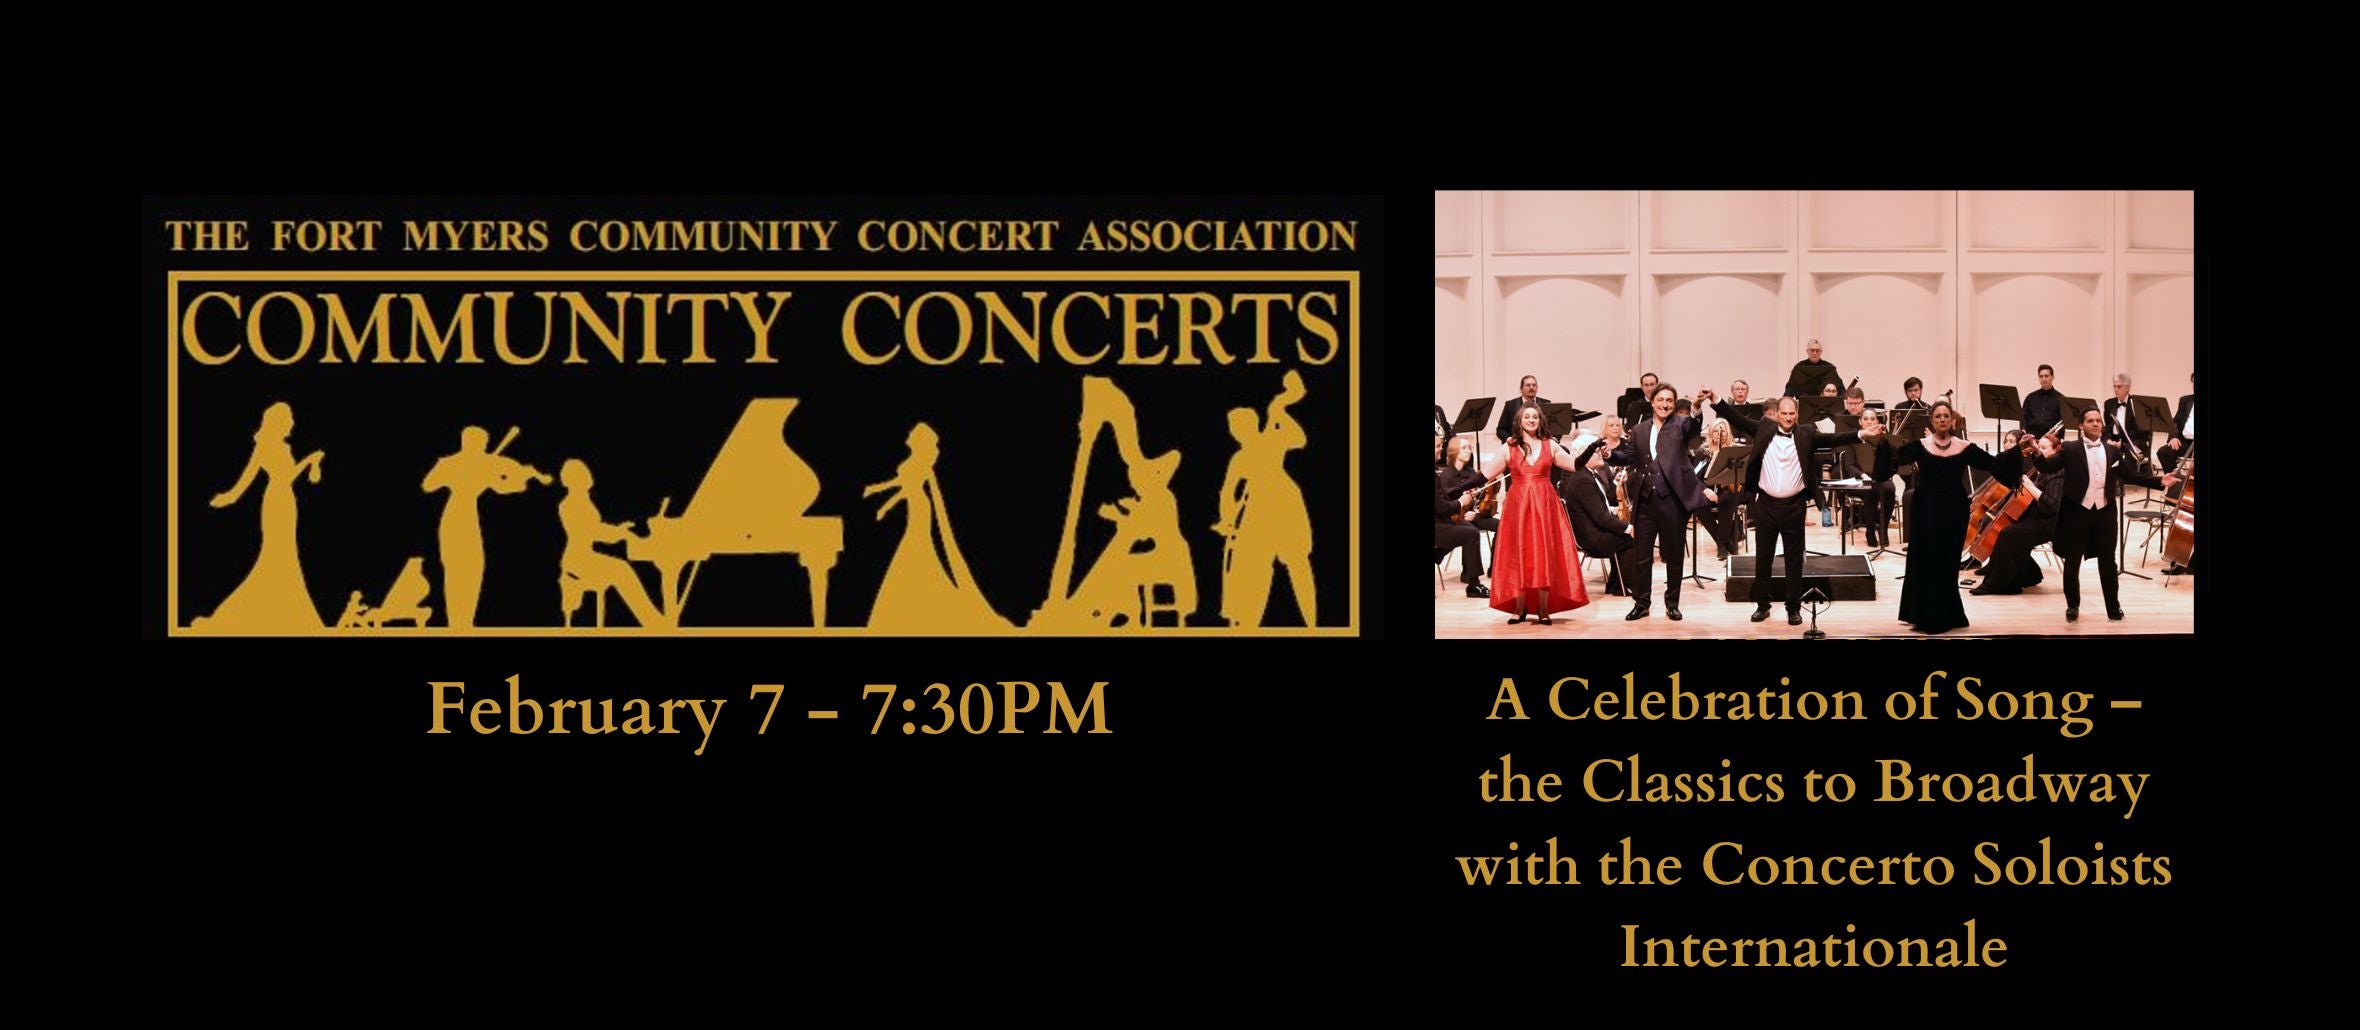 Community Concerts: A Celebration of Song – the Classics to Broadway with the Concerto Soloists Internationale